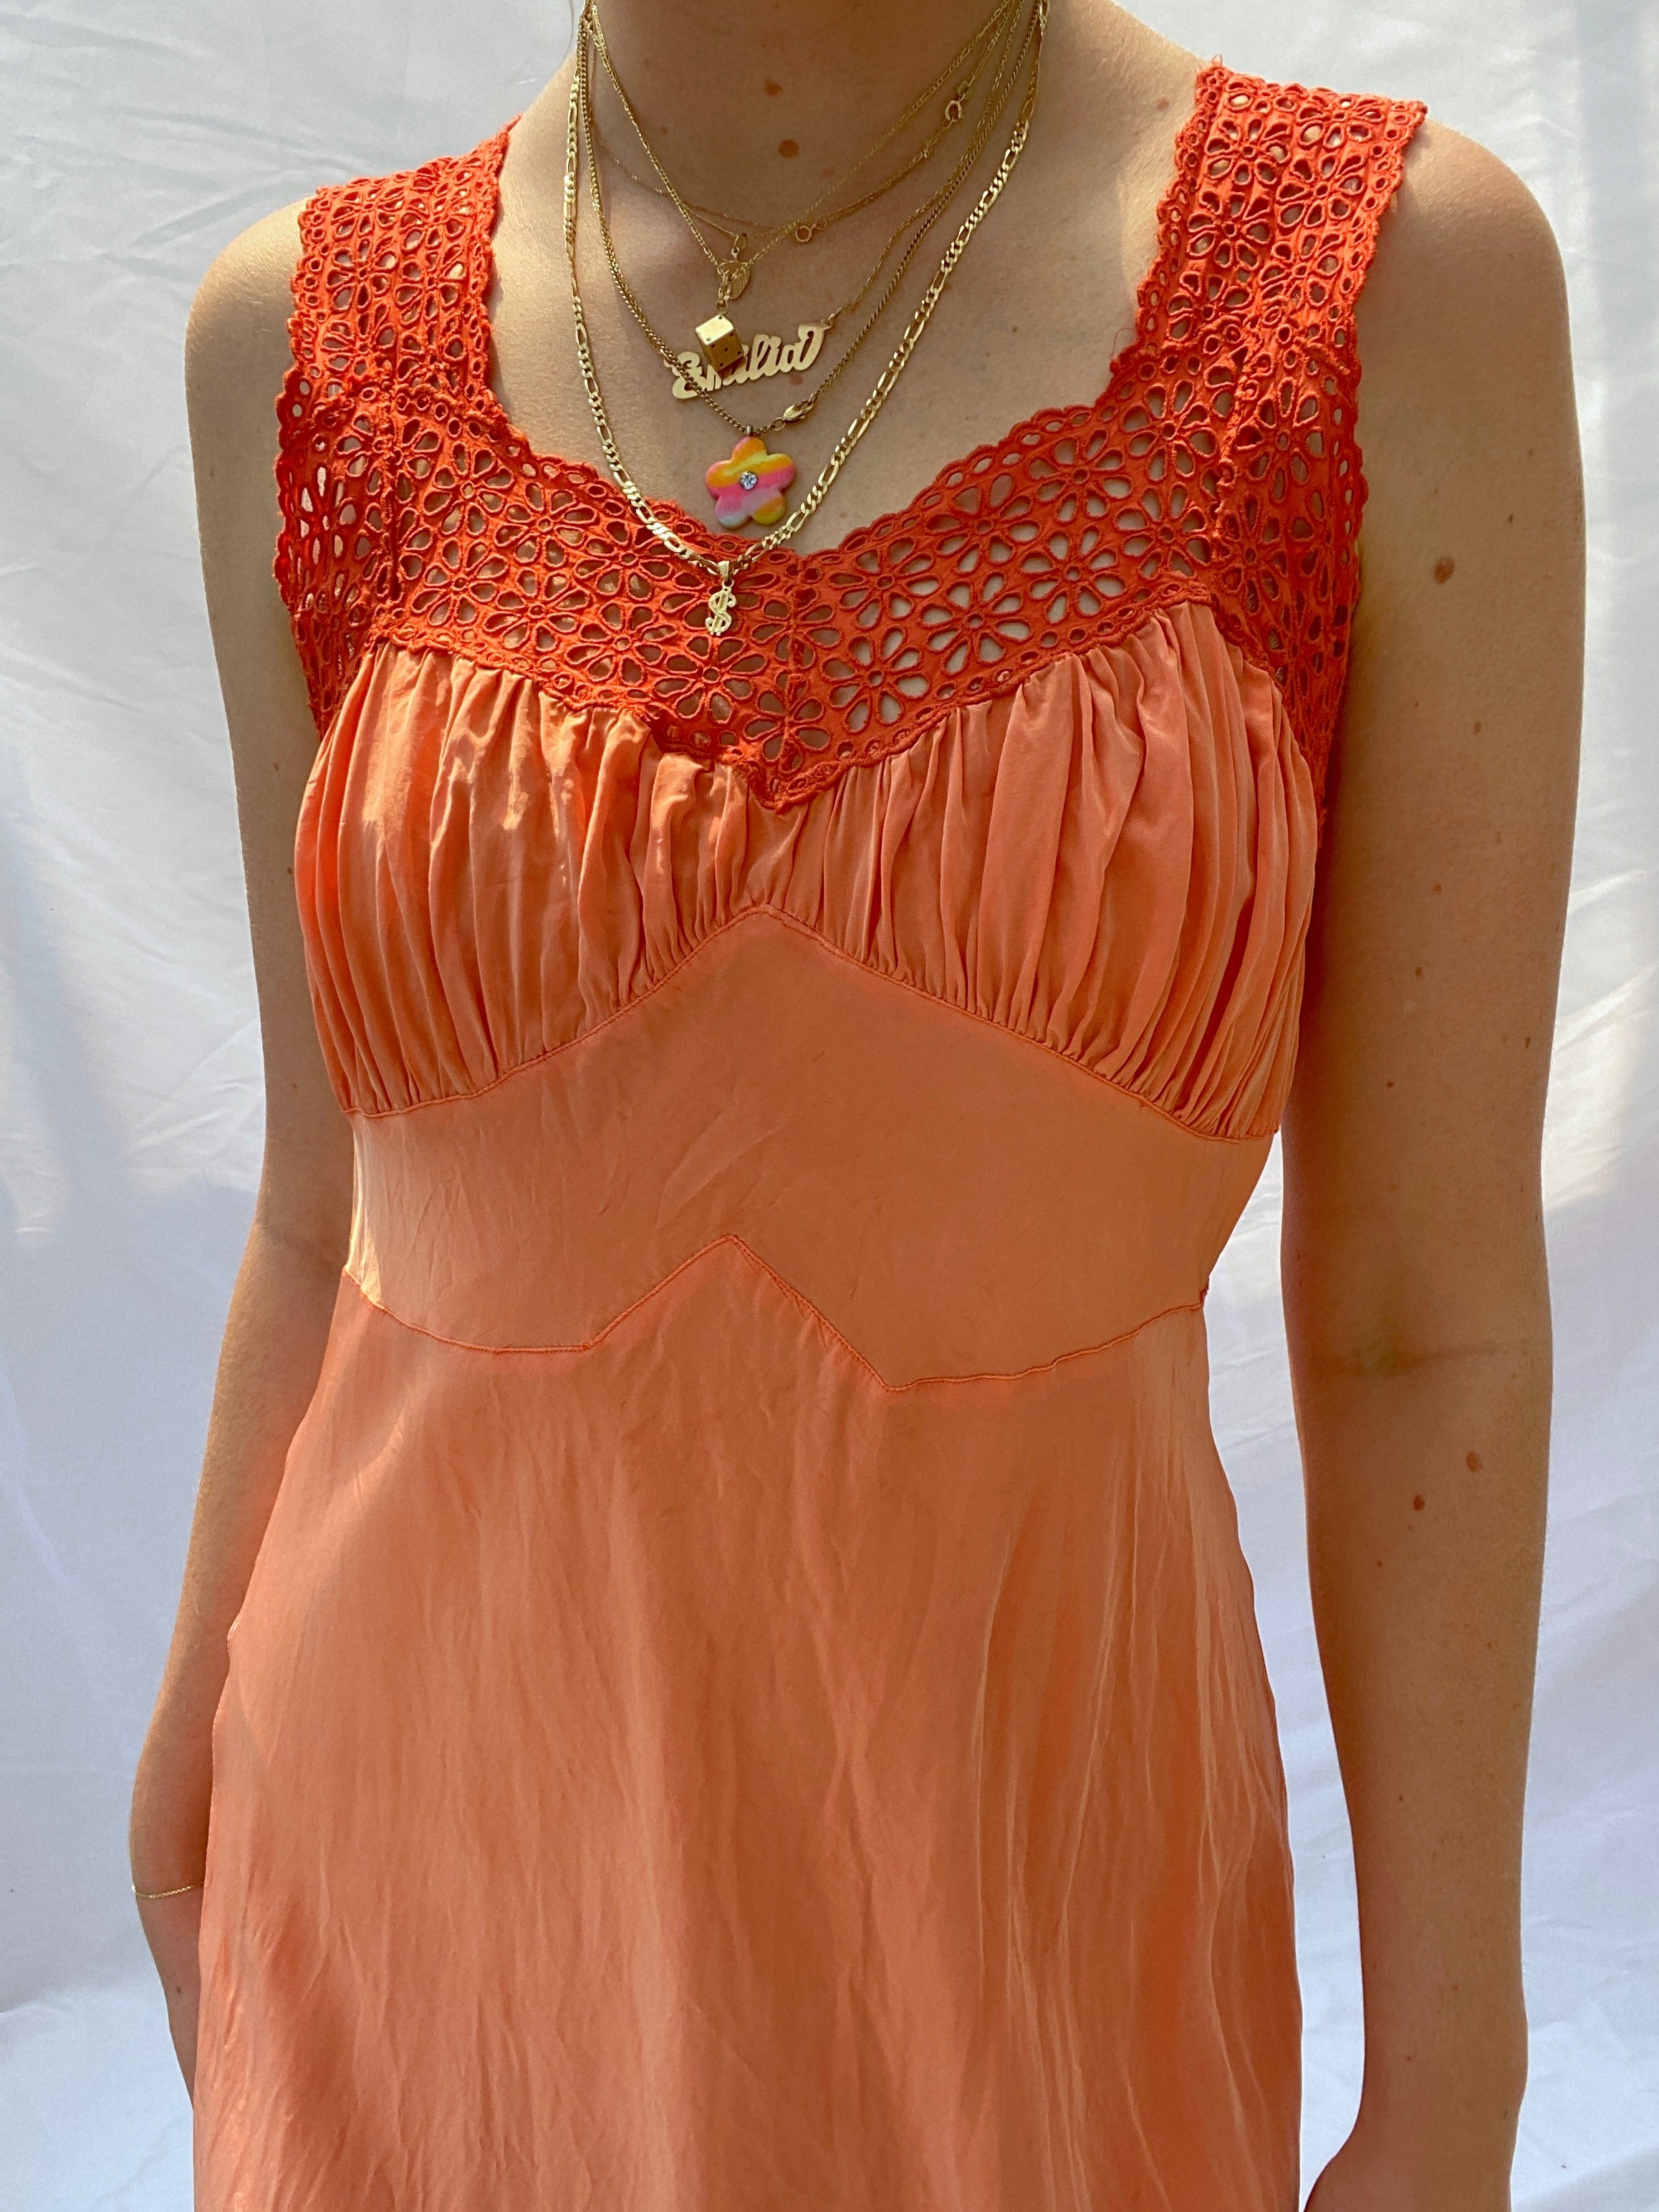 Hand Dyed Strawberry Slip with Eyelet Lace